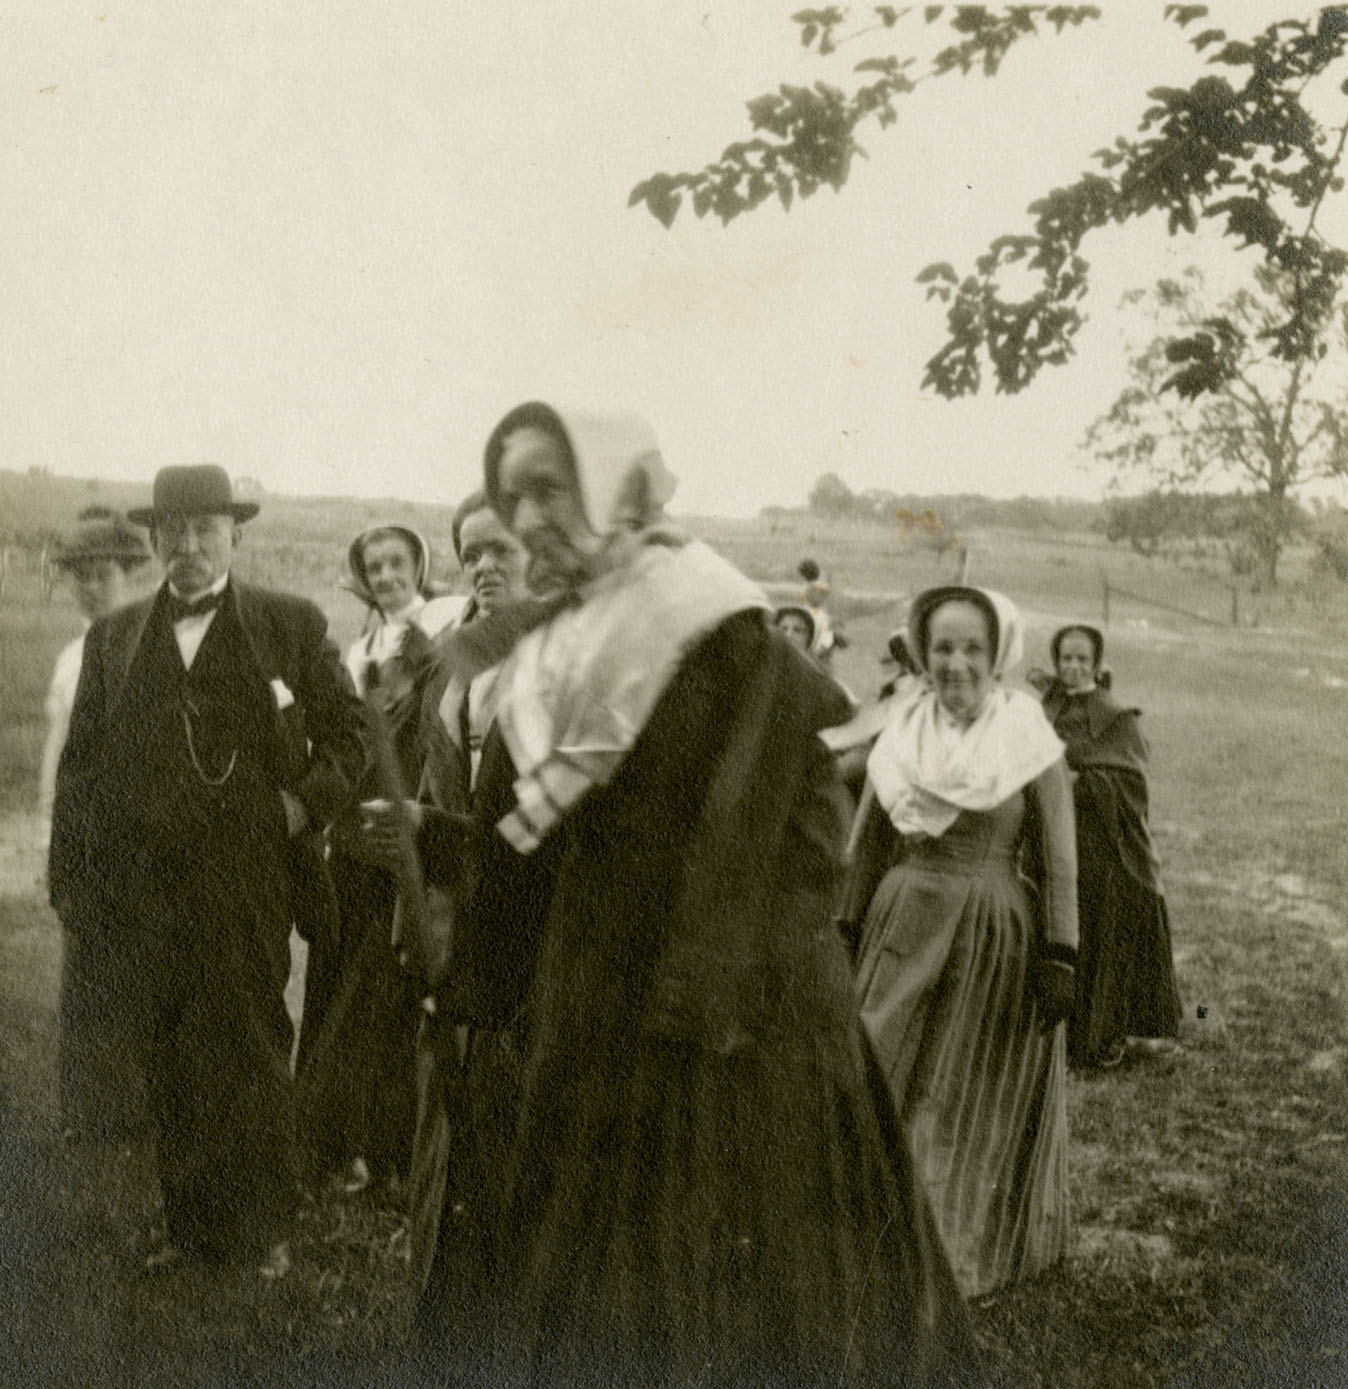 a black and white image of a group of Shaker women